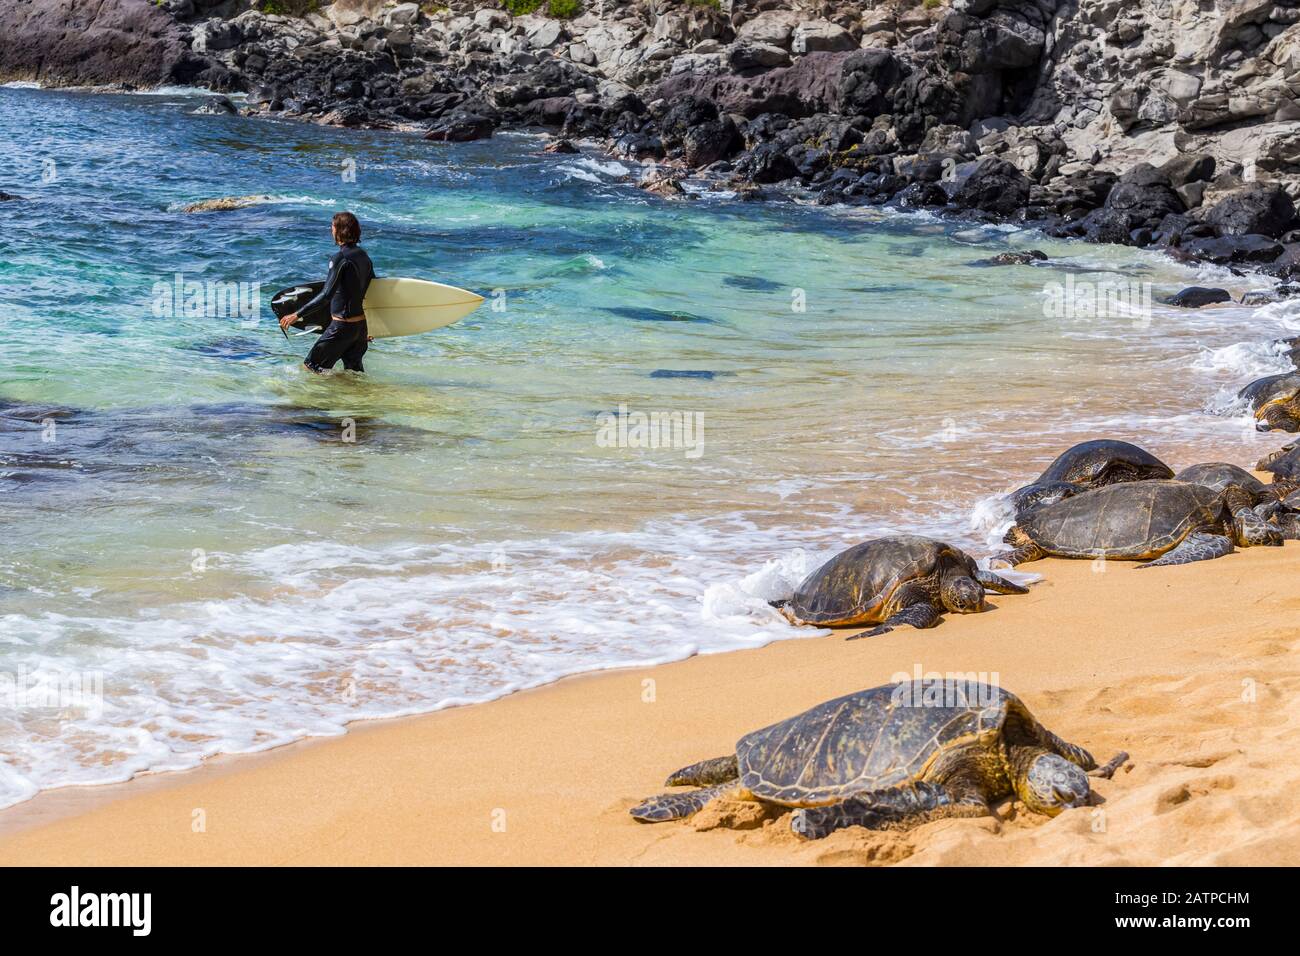 A male surfer walks away from the shoreline towards the pacific ocean surf.  Green sea turtles (Chelonia mydas) nap on the sand on the edge of the ... Stock Photo